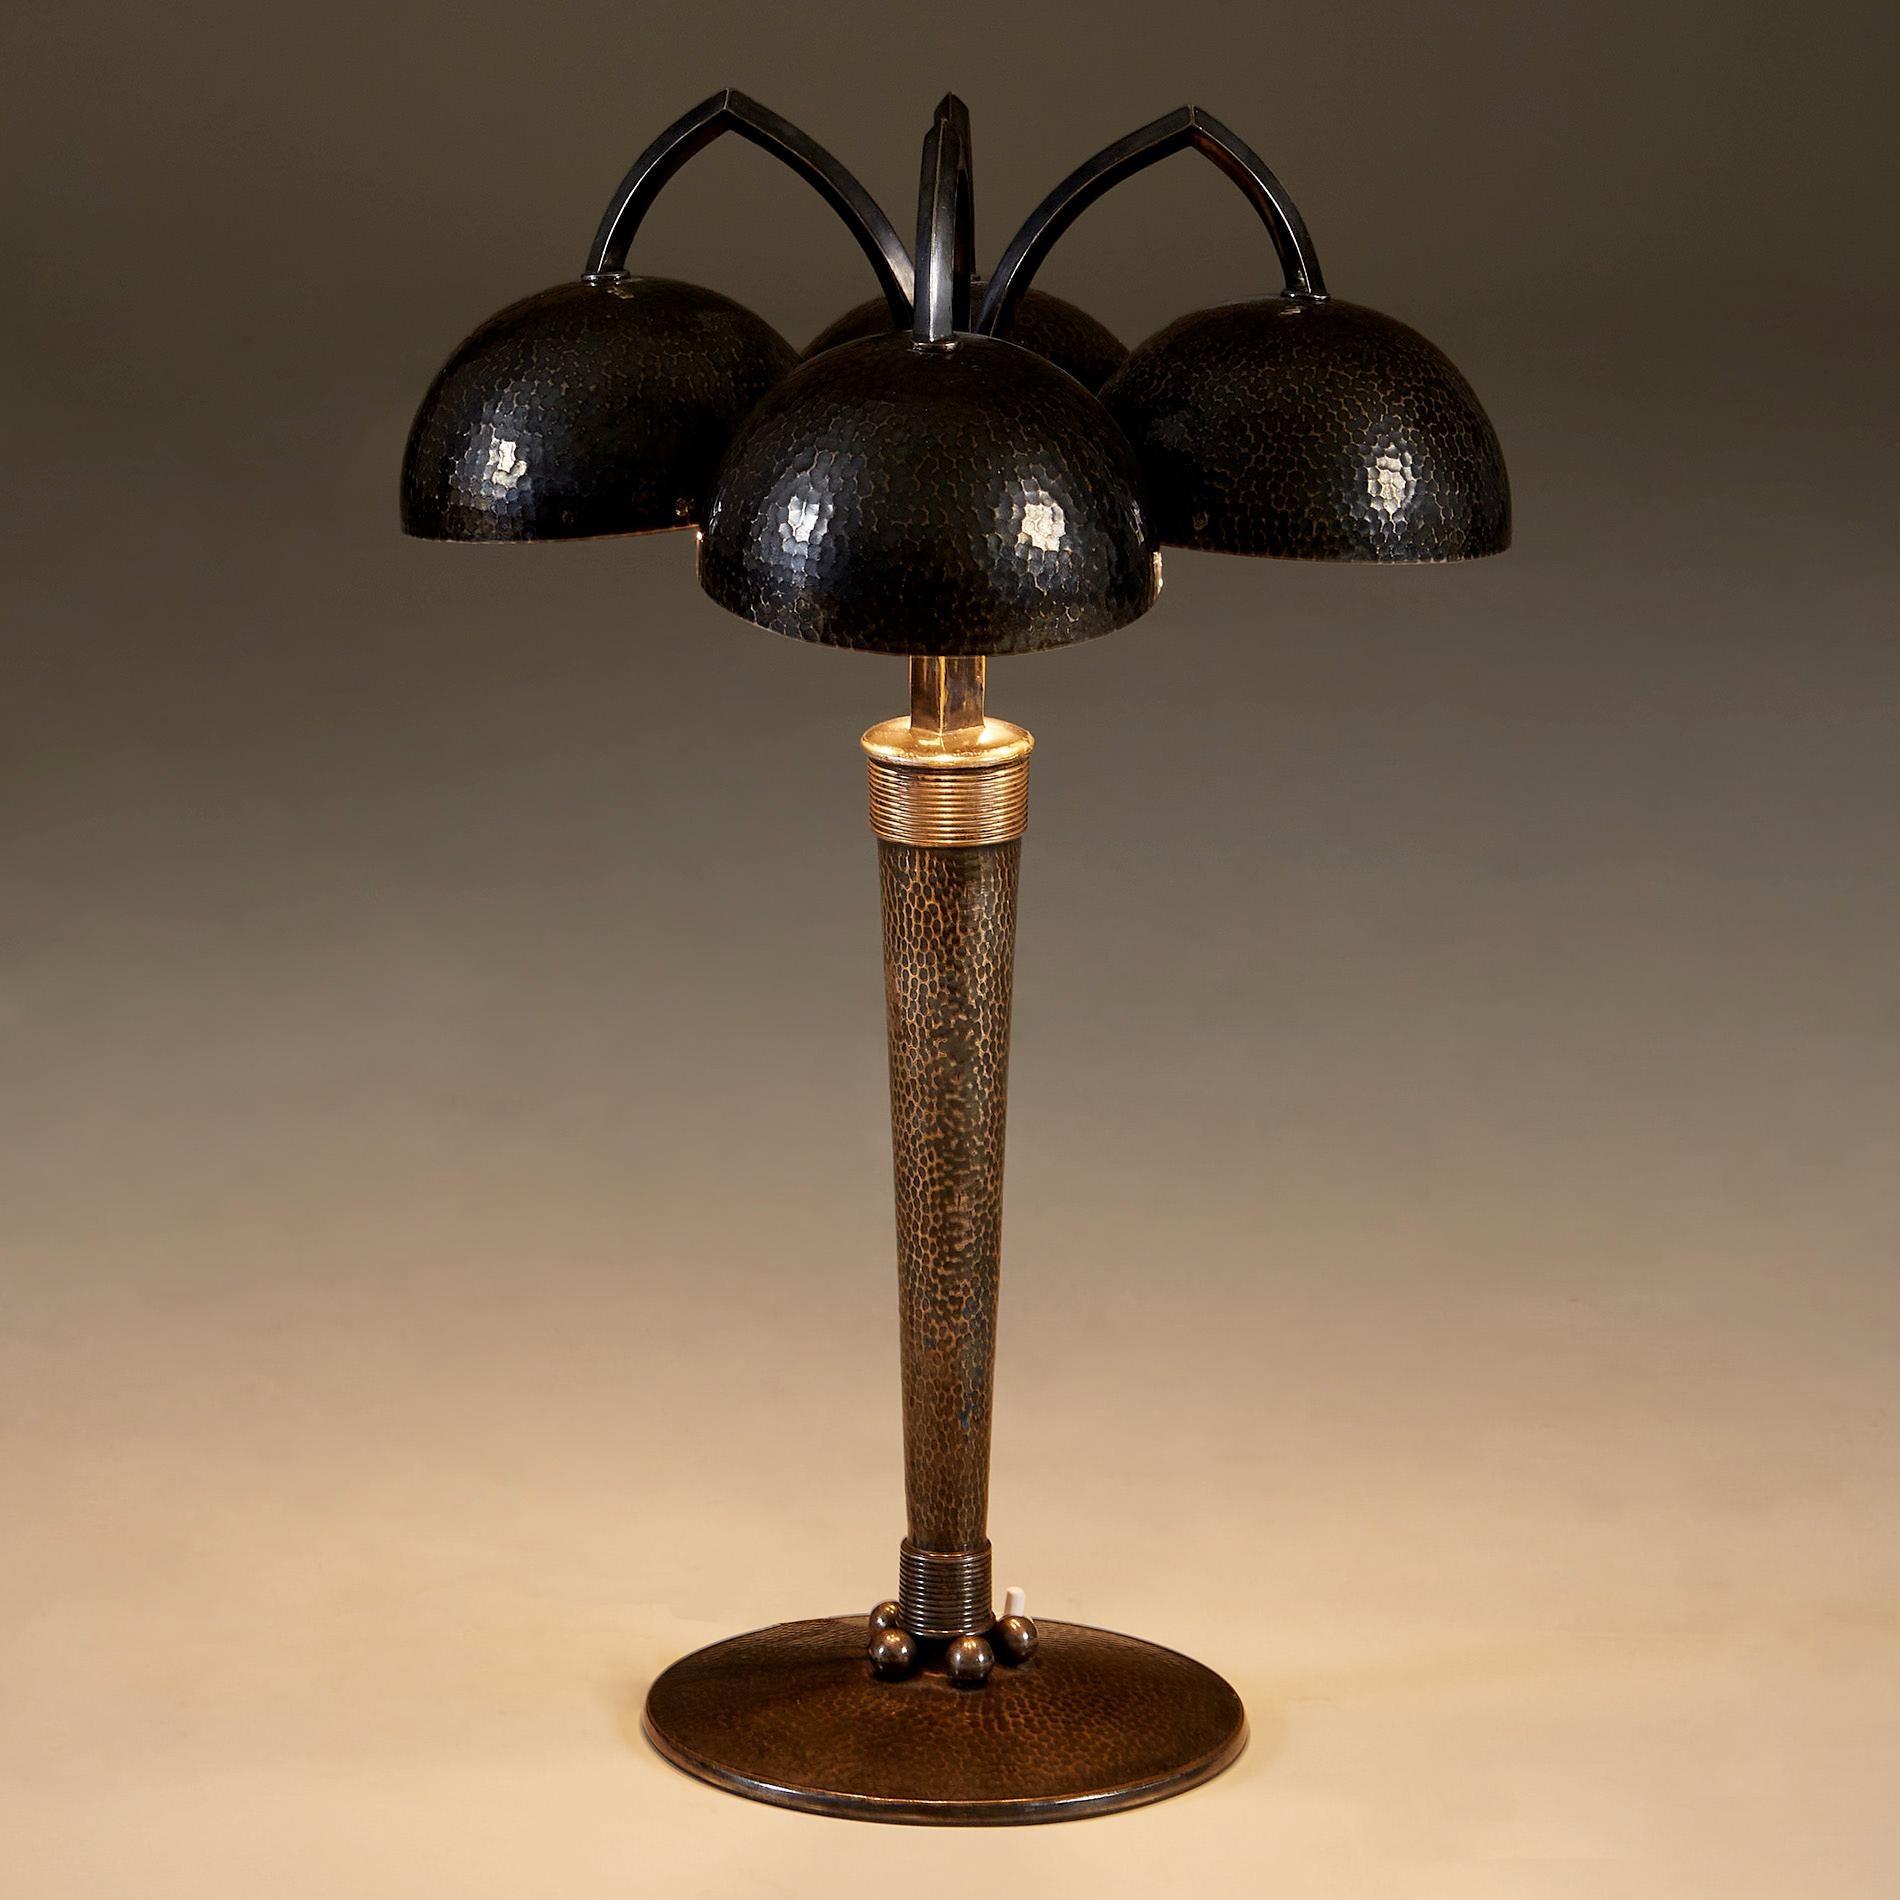 An extremely rare table lamp by two French design masters. This perfectly proportioned hammered metal table light is wonderfully refined in detail and finish. Four hammered metal shades hang from arched metal arms. These are supported by a tapered